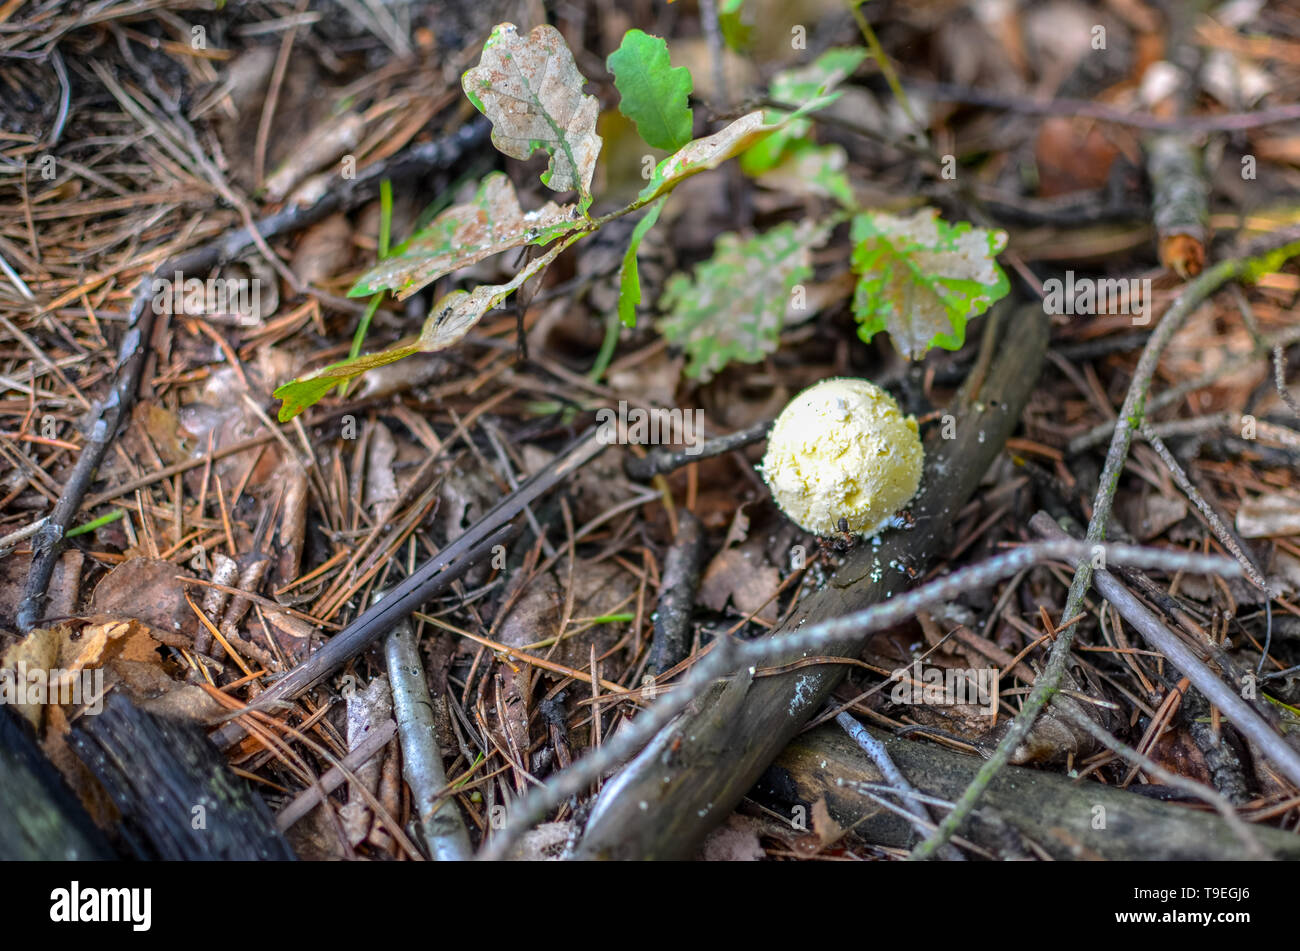 Mushroom called scleroderma bovista in the forest with sticks Stock Photo